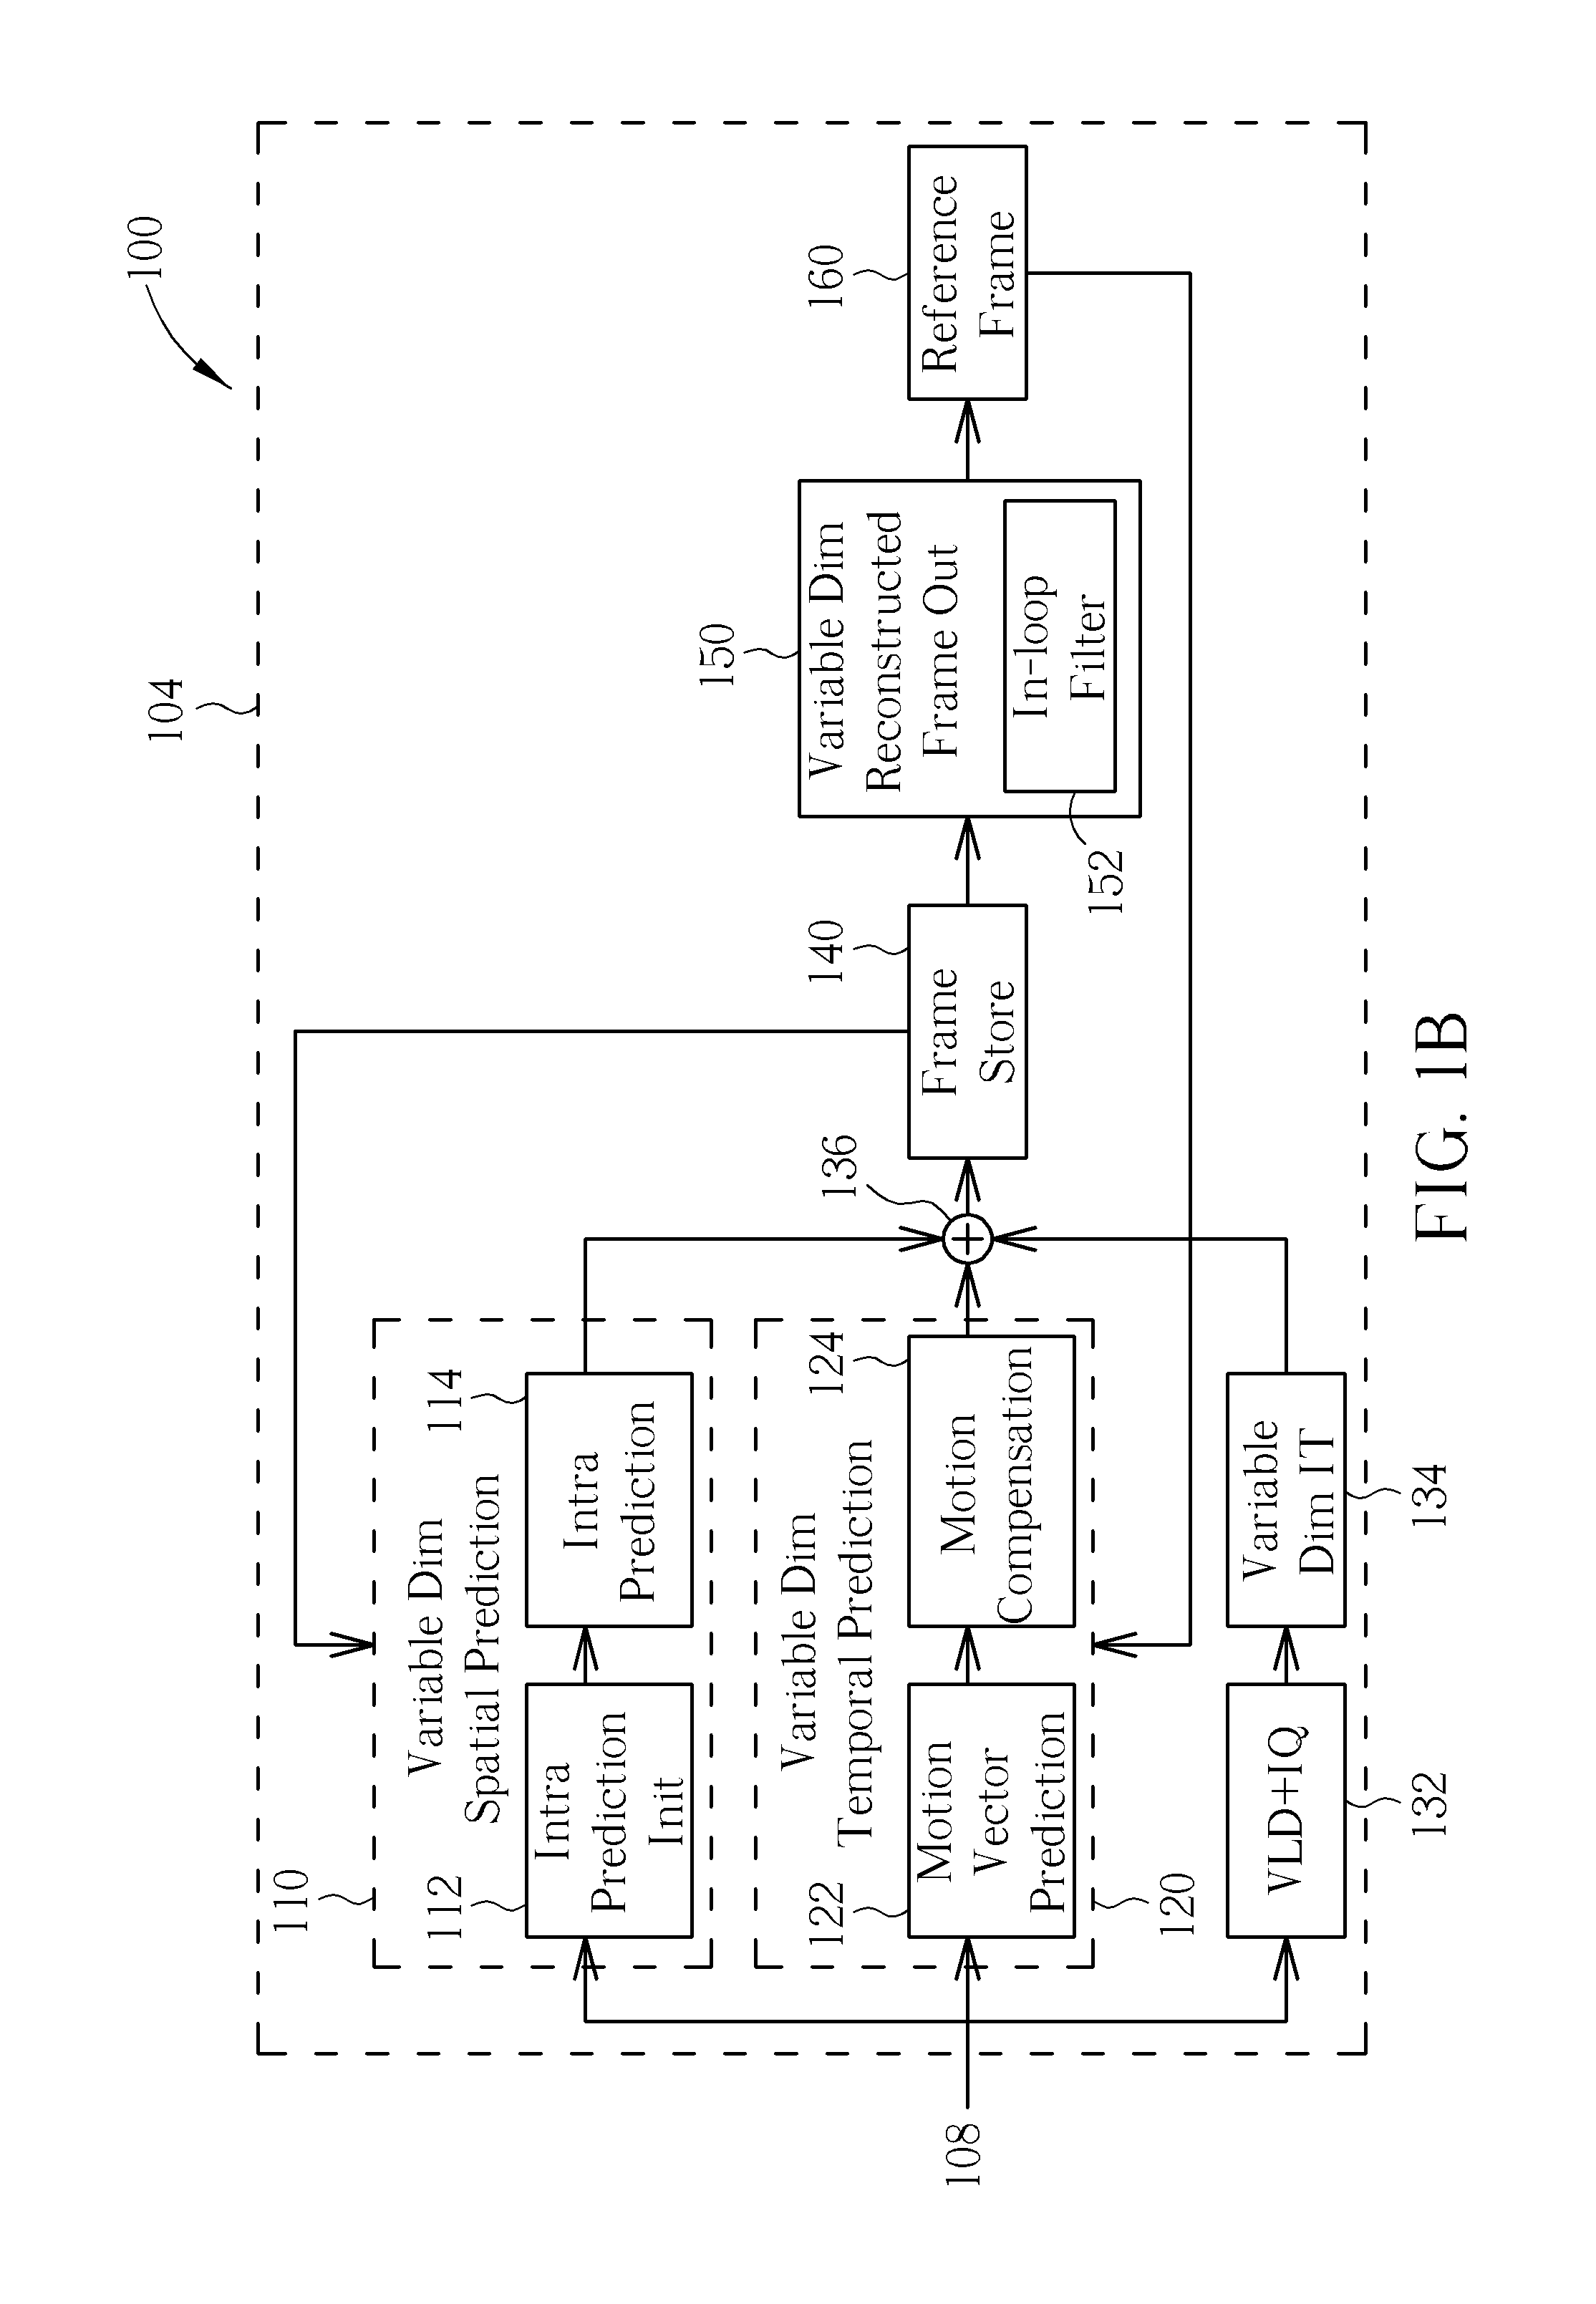 Apparatus for dynamically adjusting video decoding complexity, and associated method